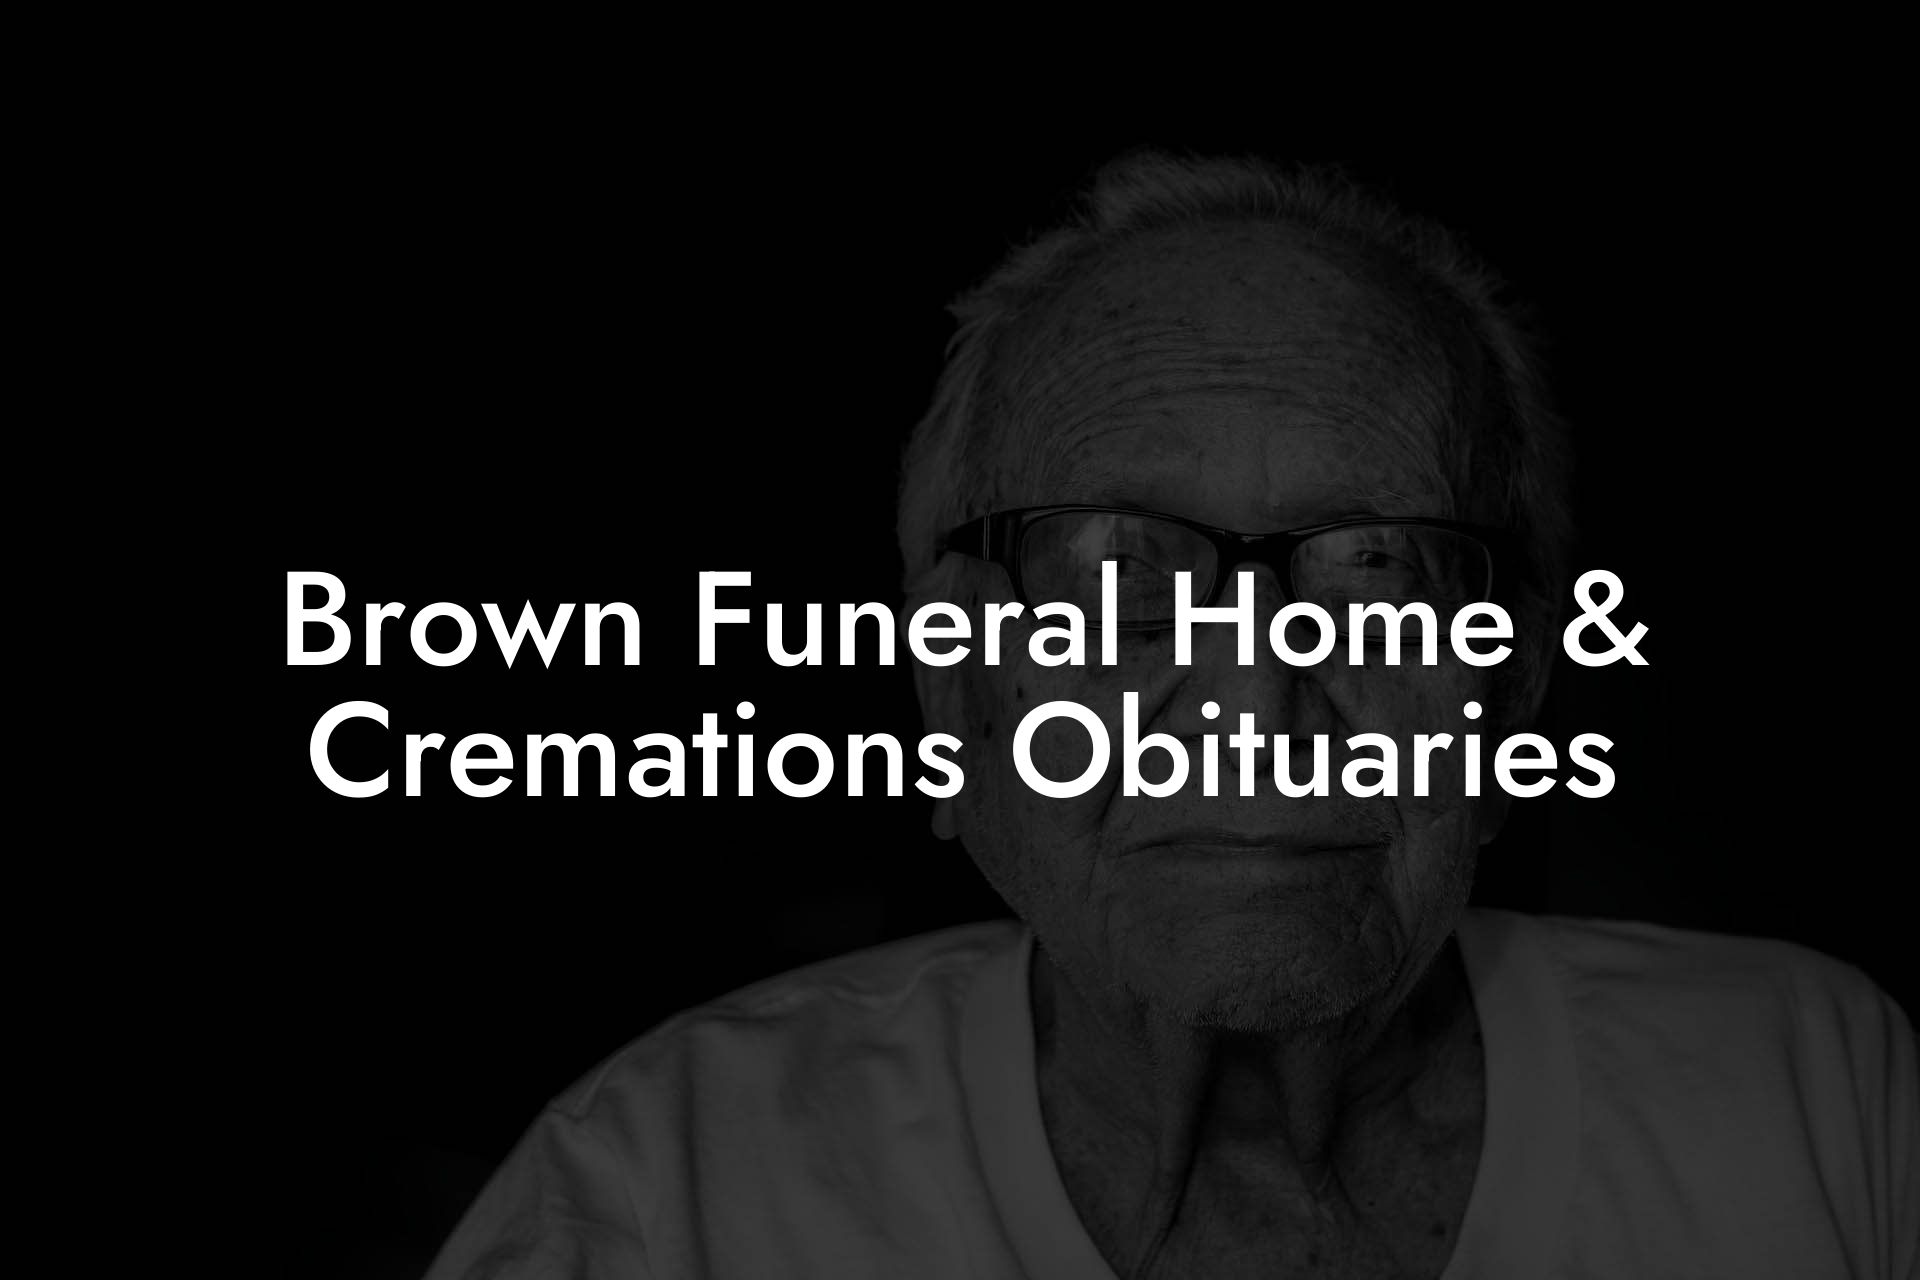 Brown Funeral Home & Cremations Obituaries